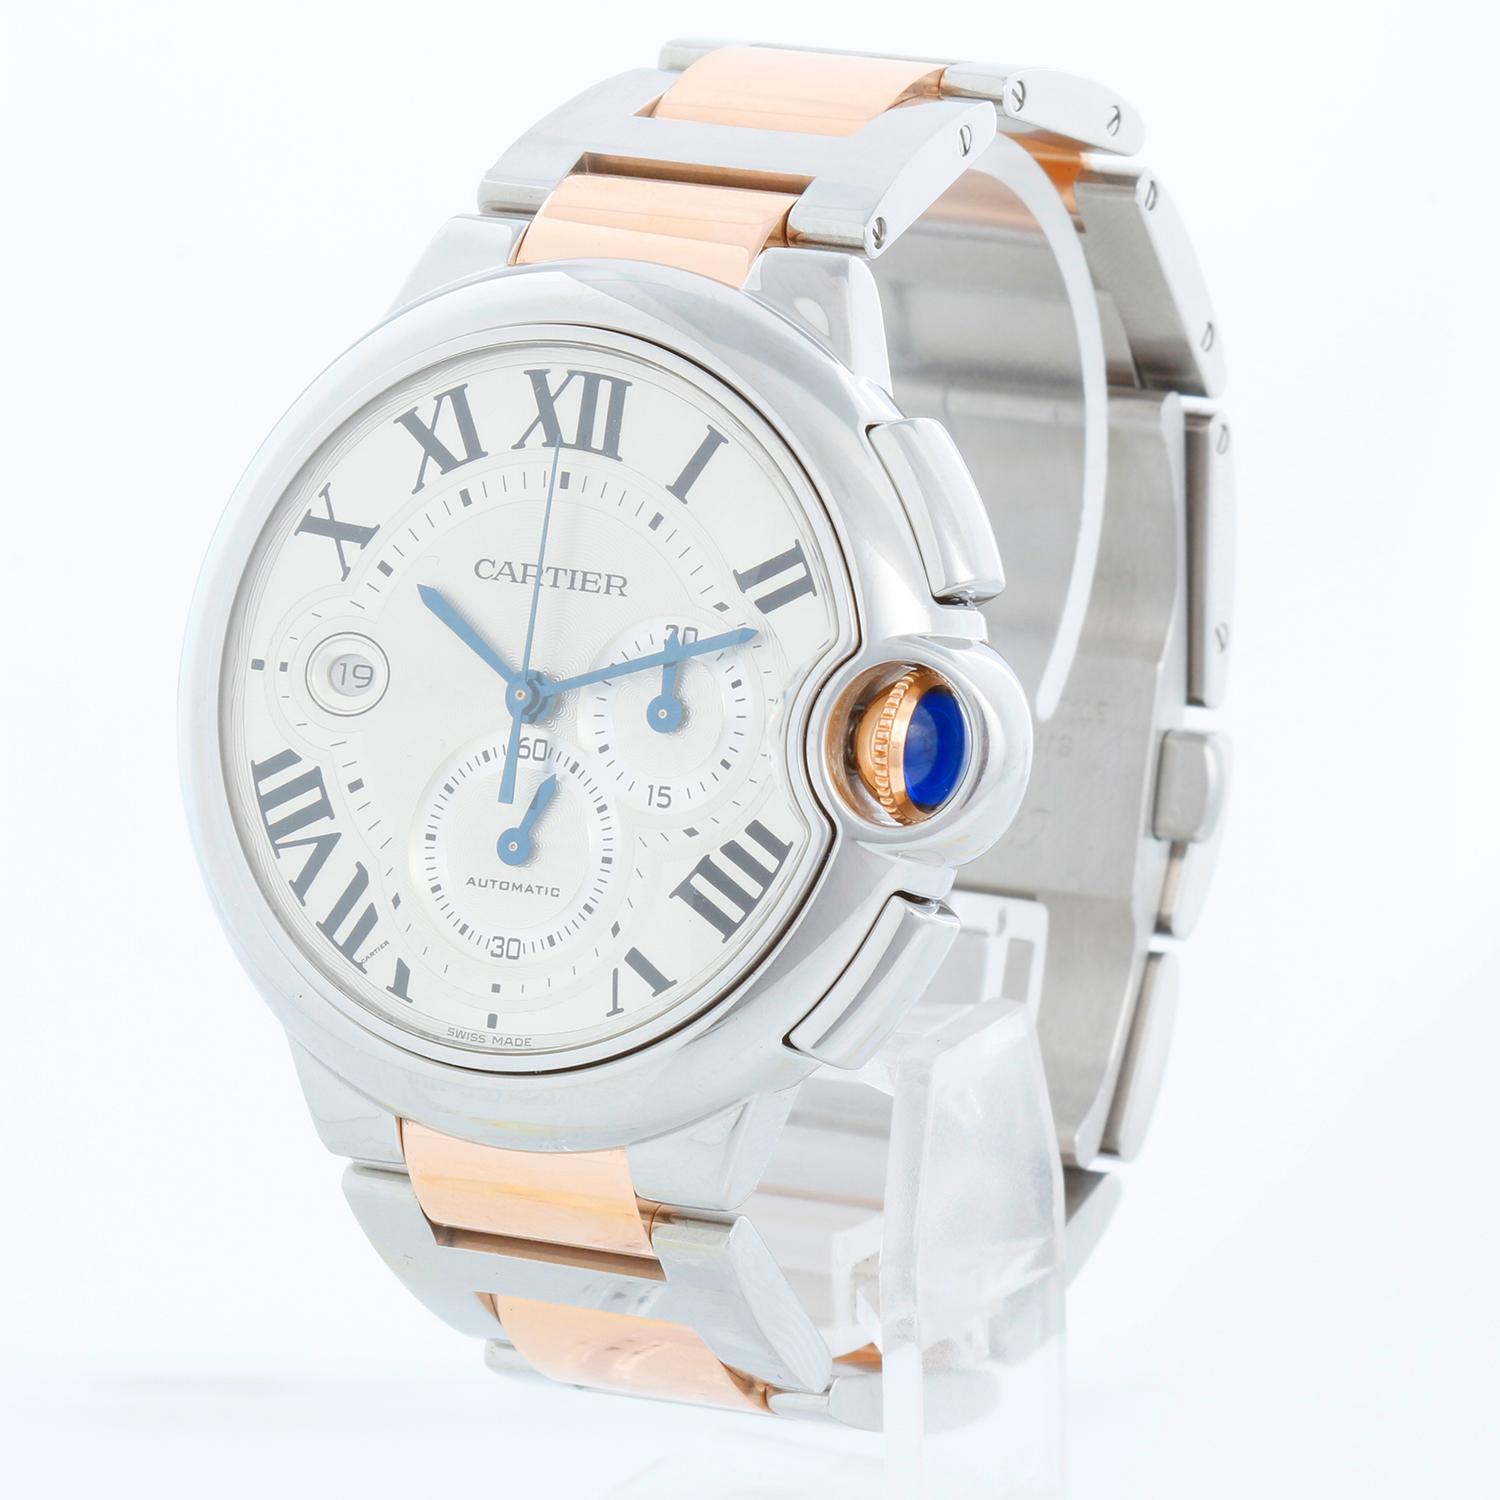 Cartier Ballon Bleu 44mm Stainless Steel & Rose Gold Chronograph W6920063 - Automatic winding; chronograph. Stainless steel  & Rose Gold (44mm diameter). Silver guilloche dial with black Roman numerals; date at 9 o'clock. Stainless steel & Rose Gold